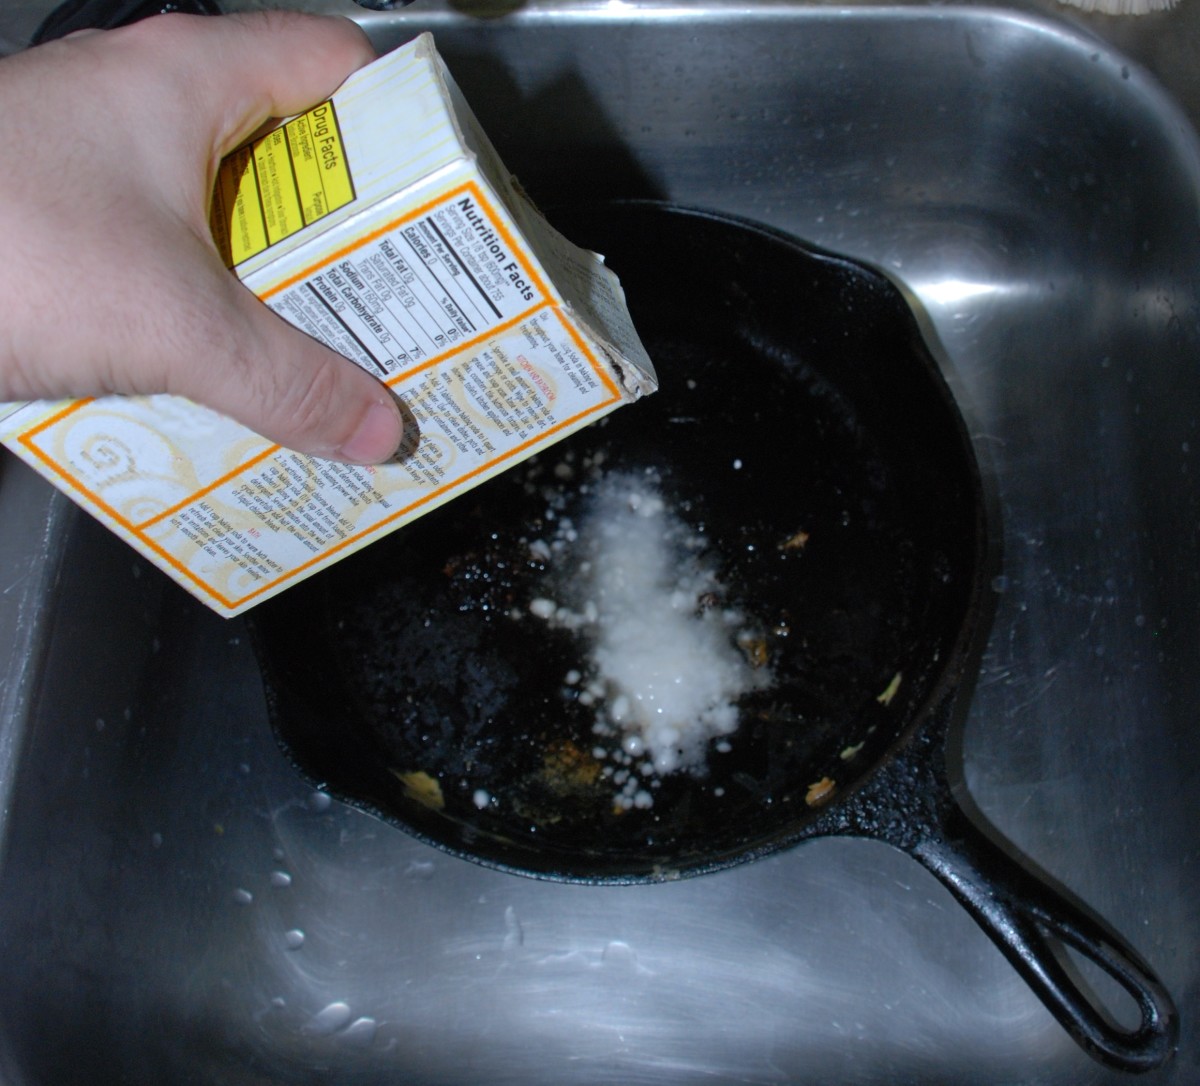 Baking soda is helpful in cleaning cast iron cookware. 